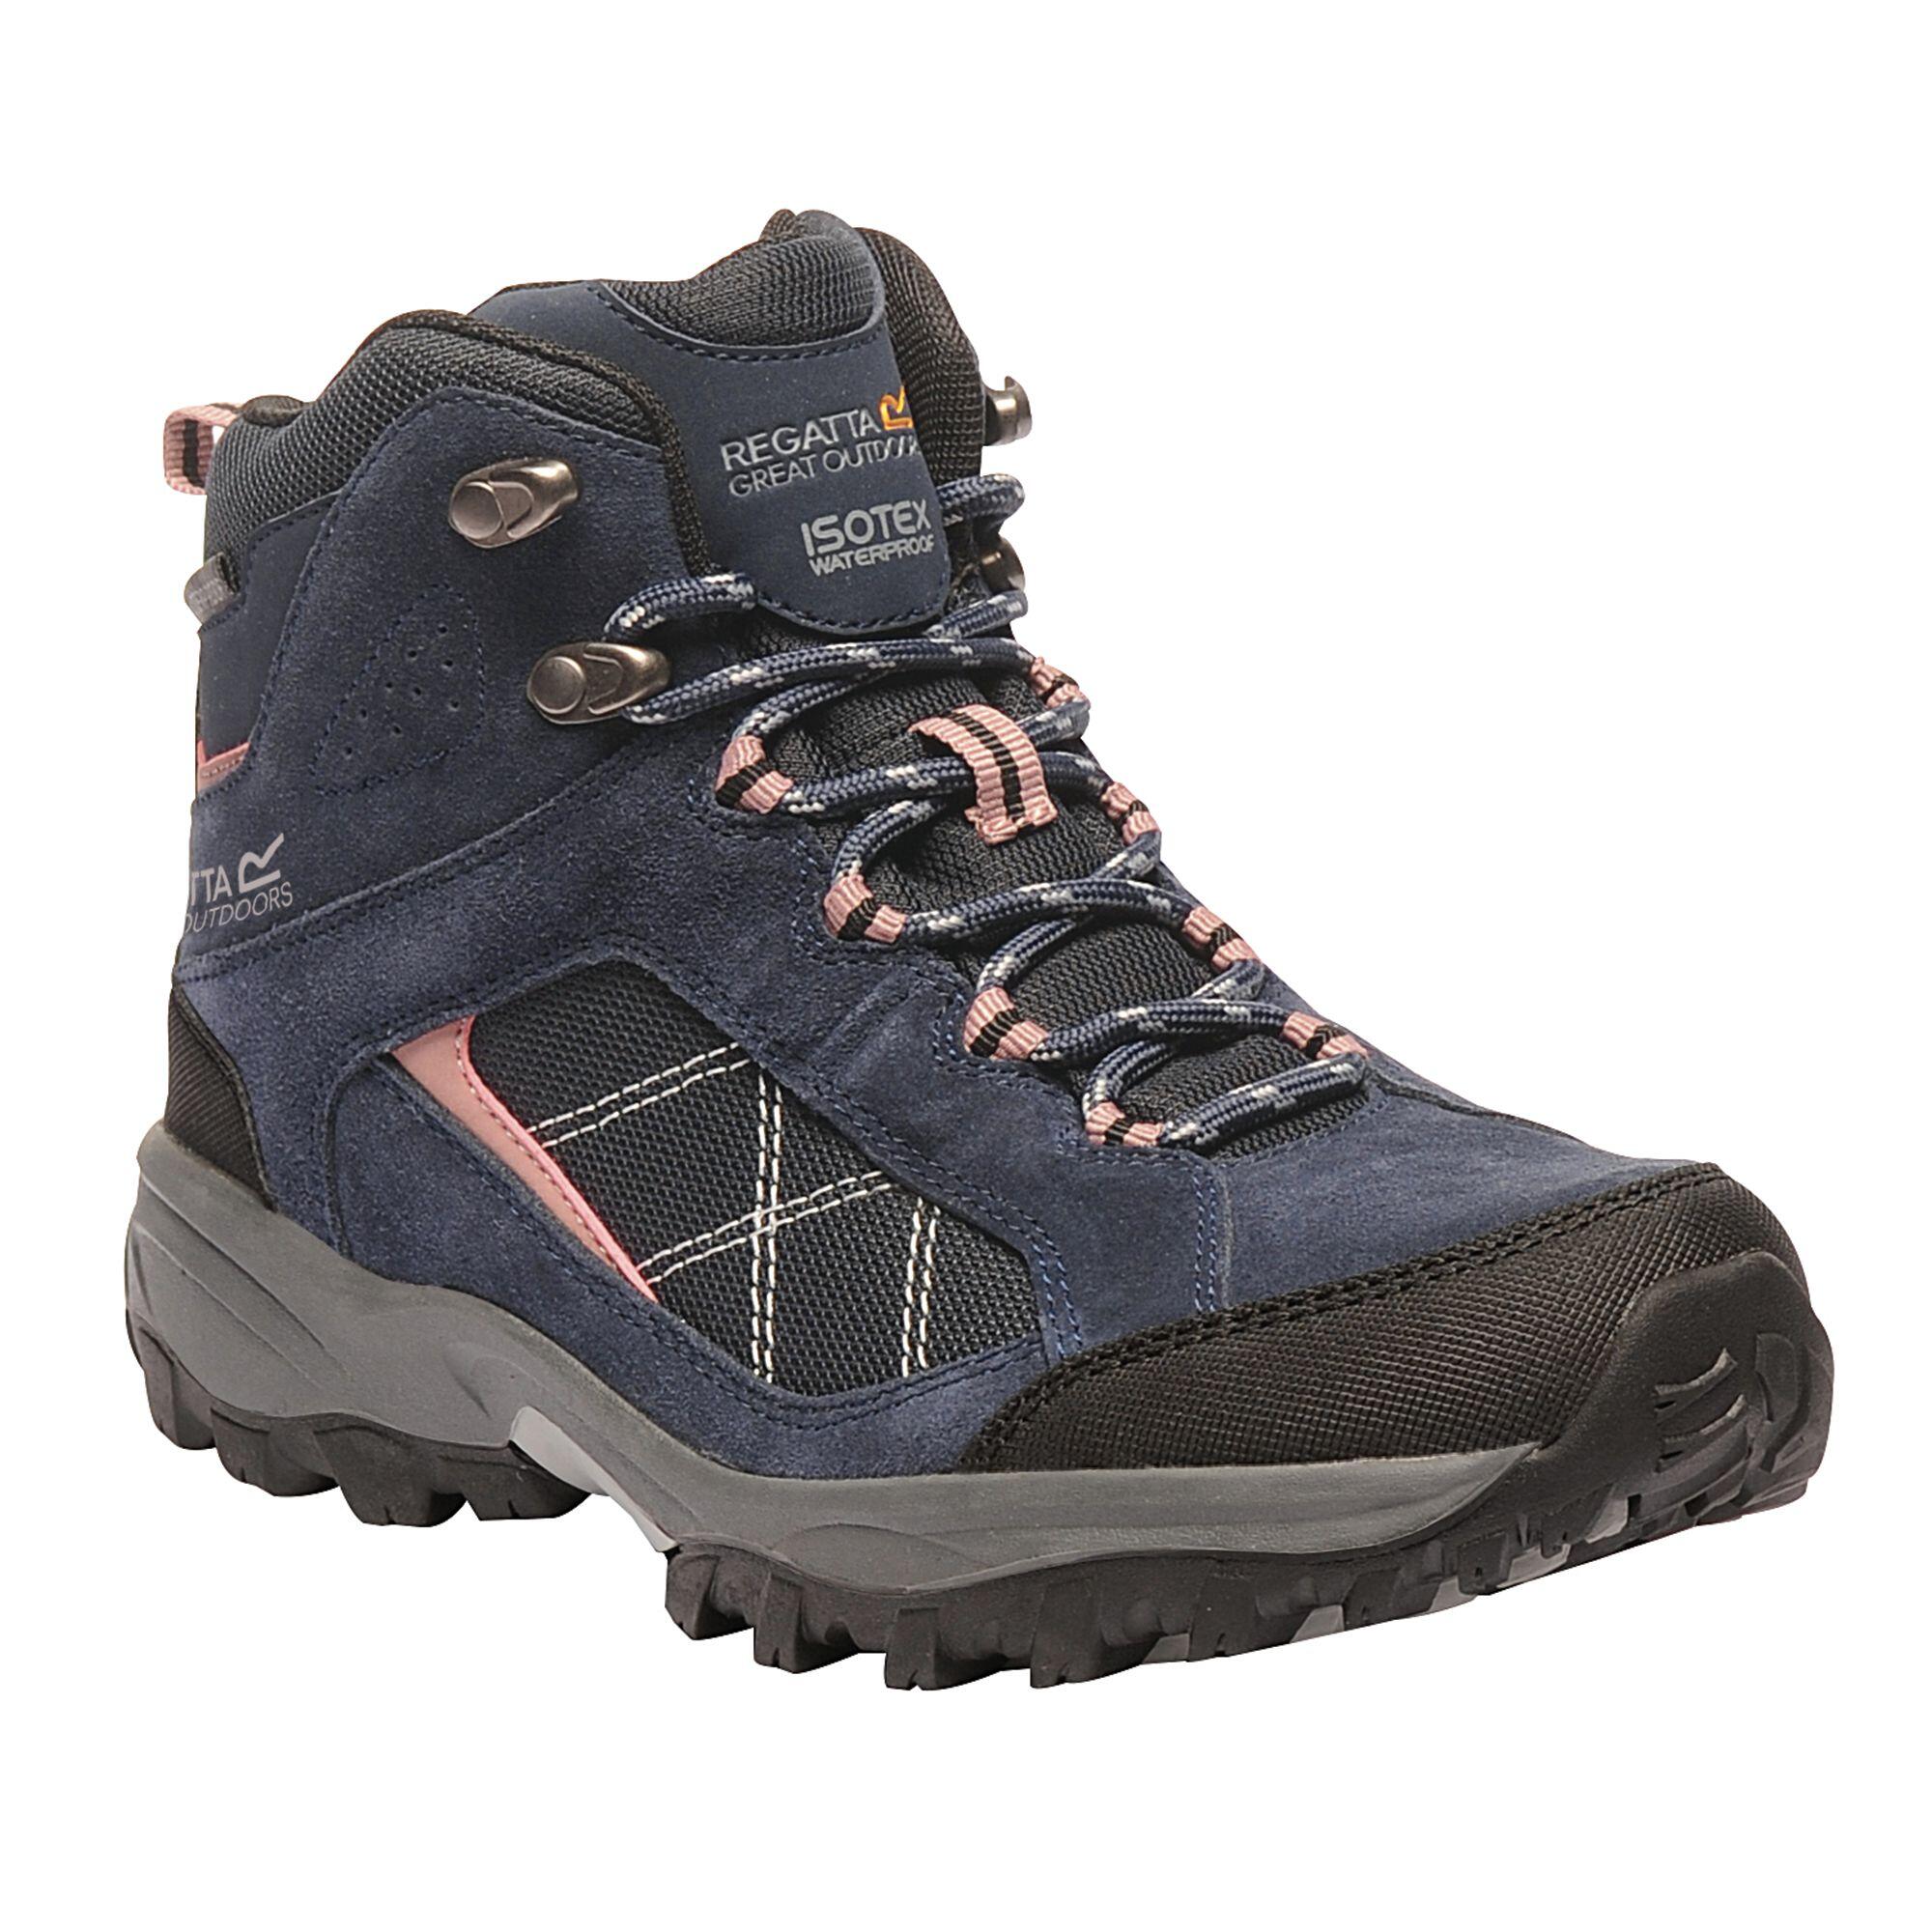 Great Outdoors Womens/Ladies Lady Clydebank Waterproof Hiking Boots (Navy/Ash 1/4